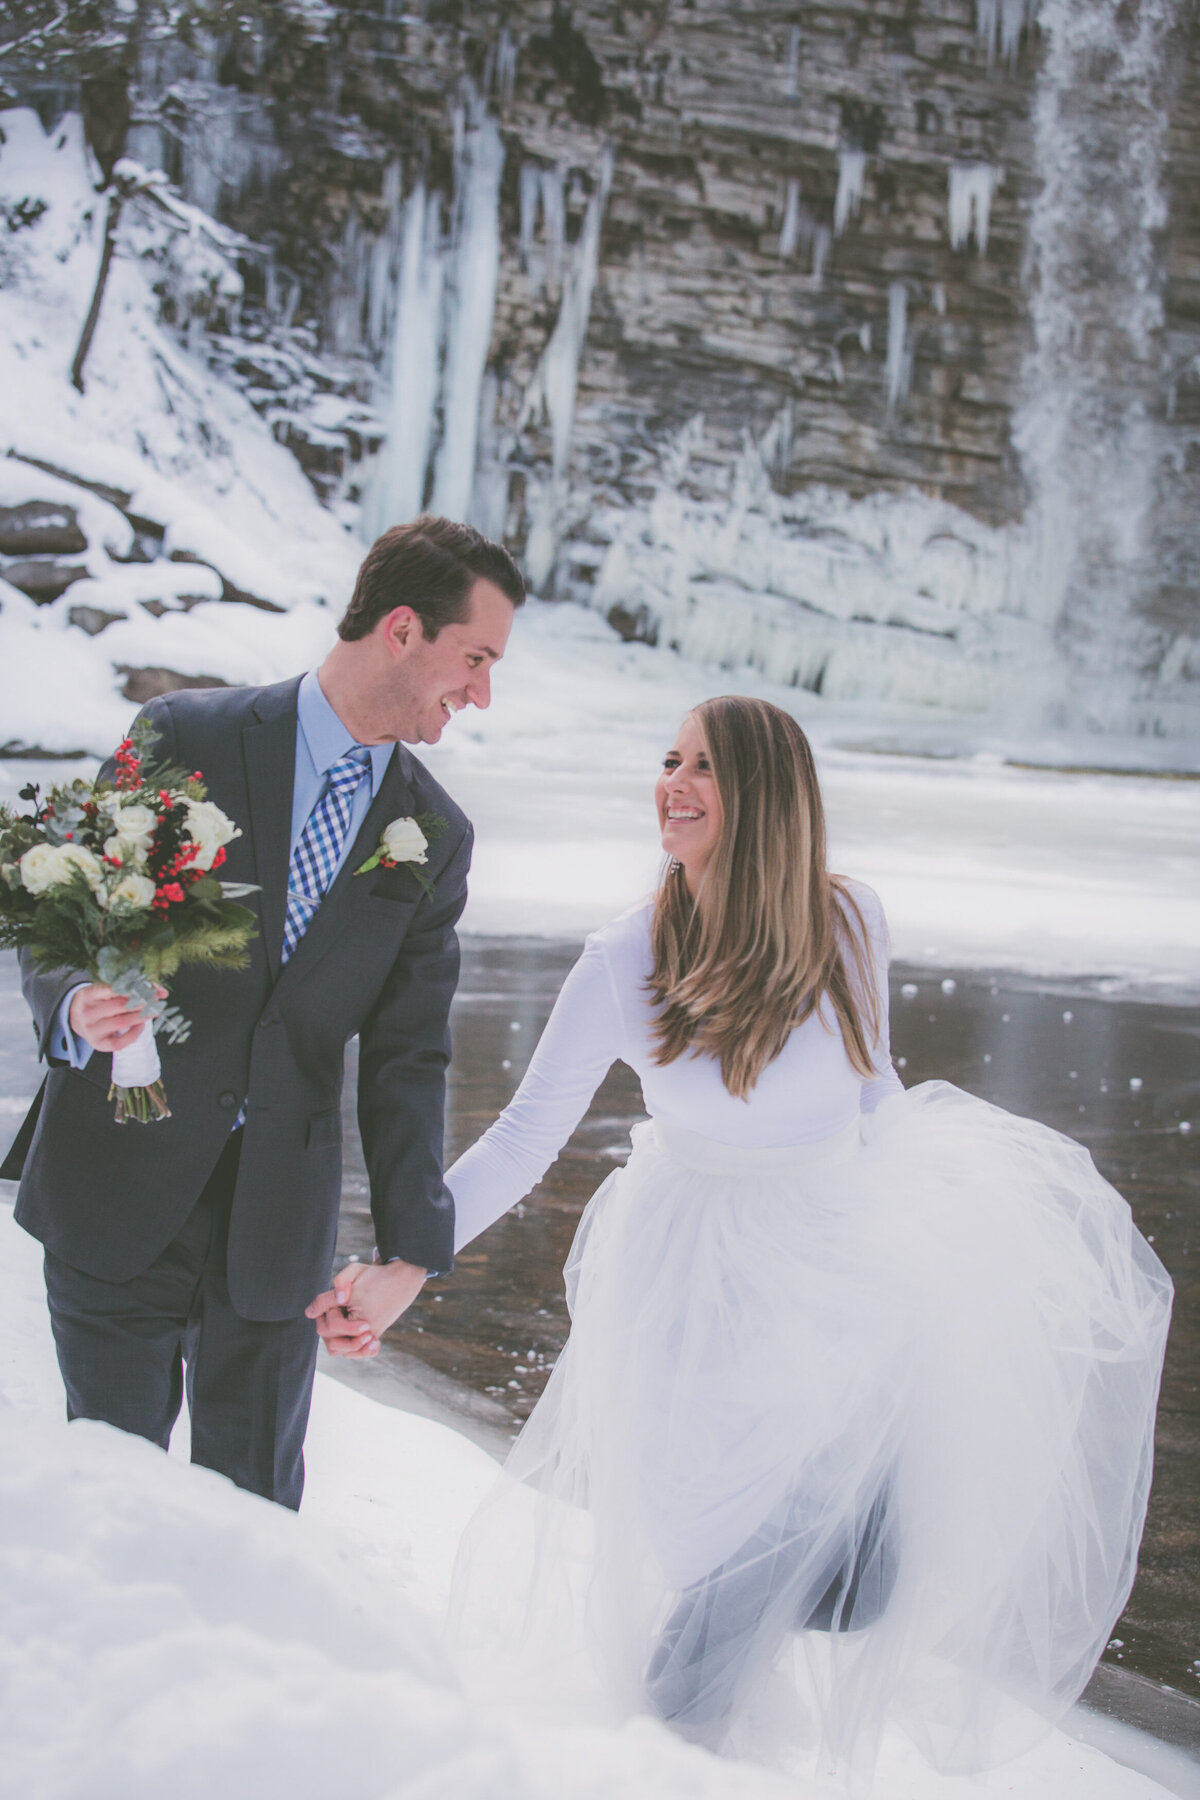 Groom helps hold bouquet while couple walks through snow.